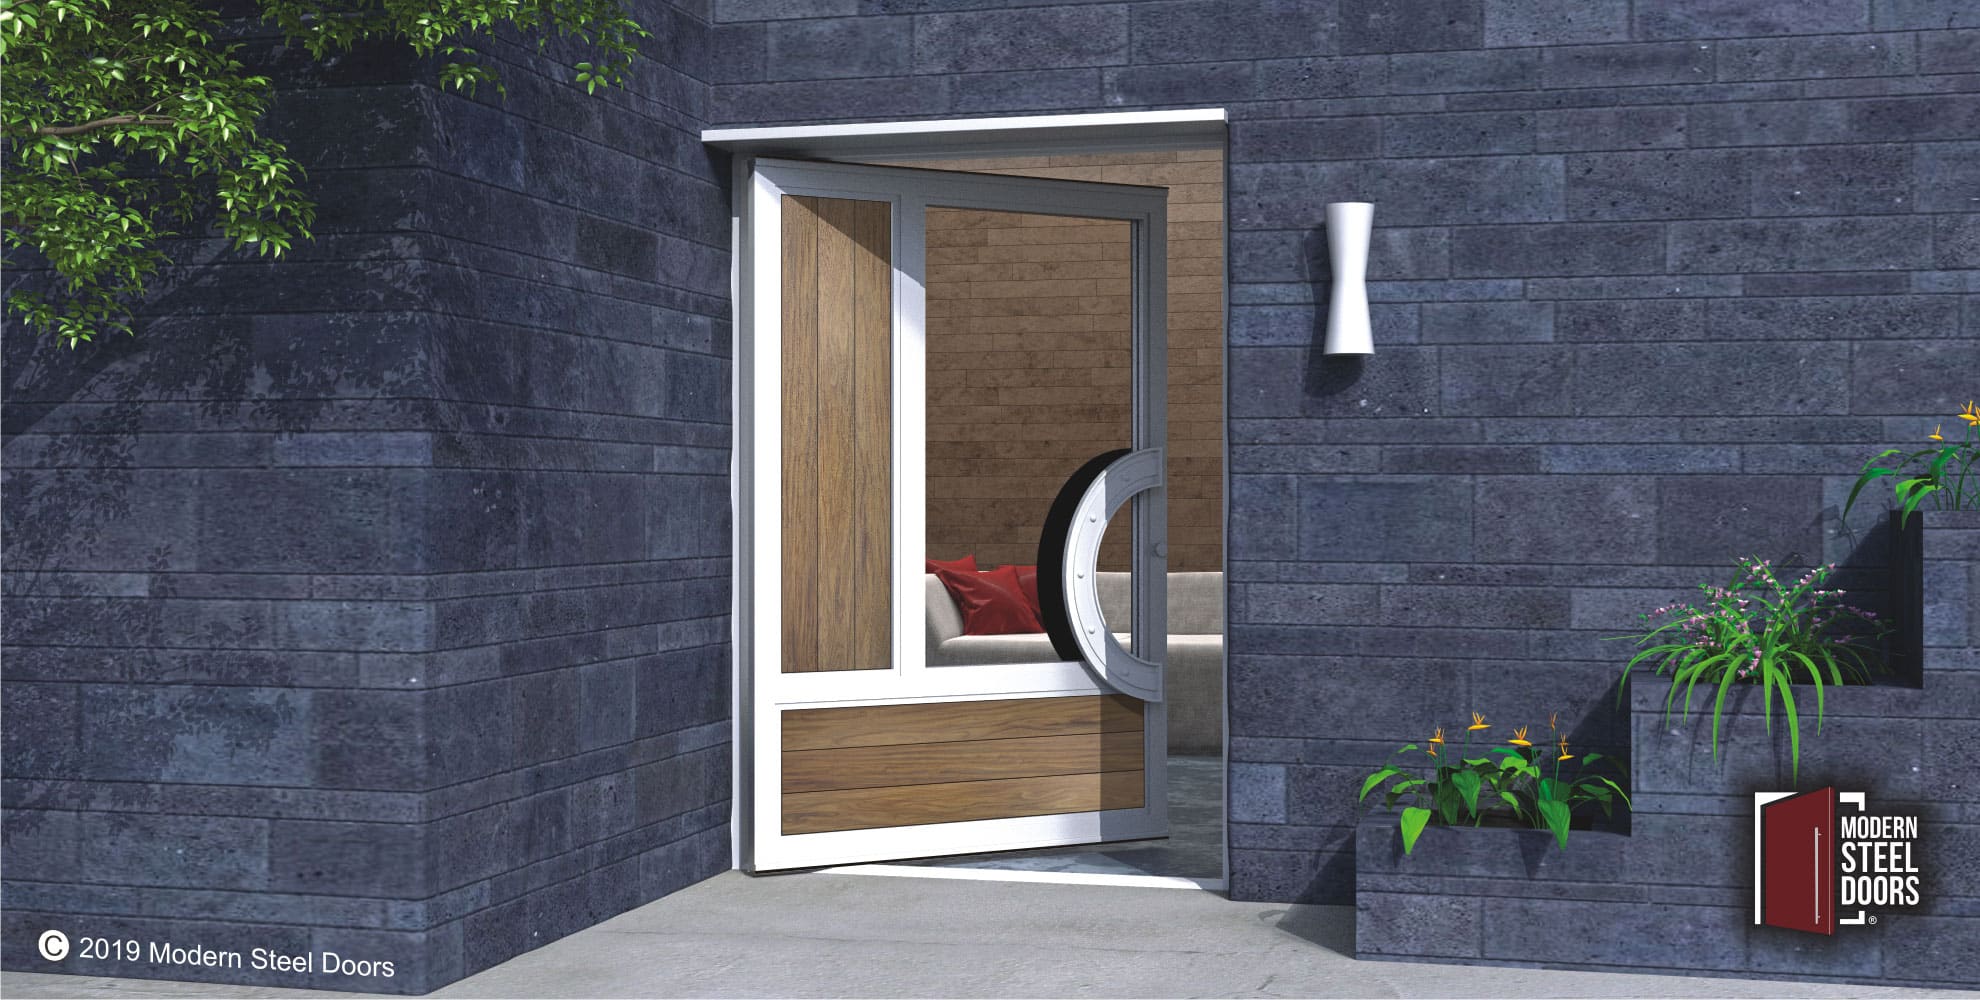 luxury exterior door made of washed teak wood and glass with curved modern door handles